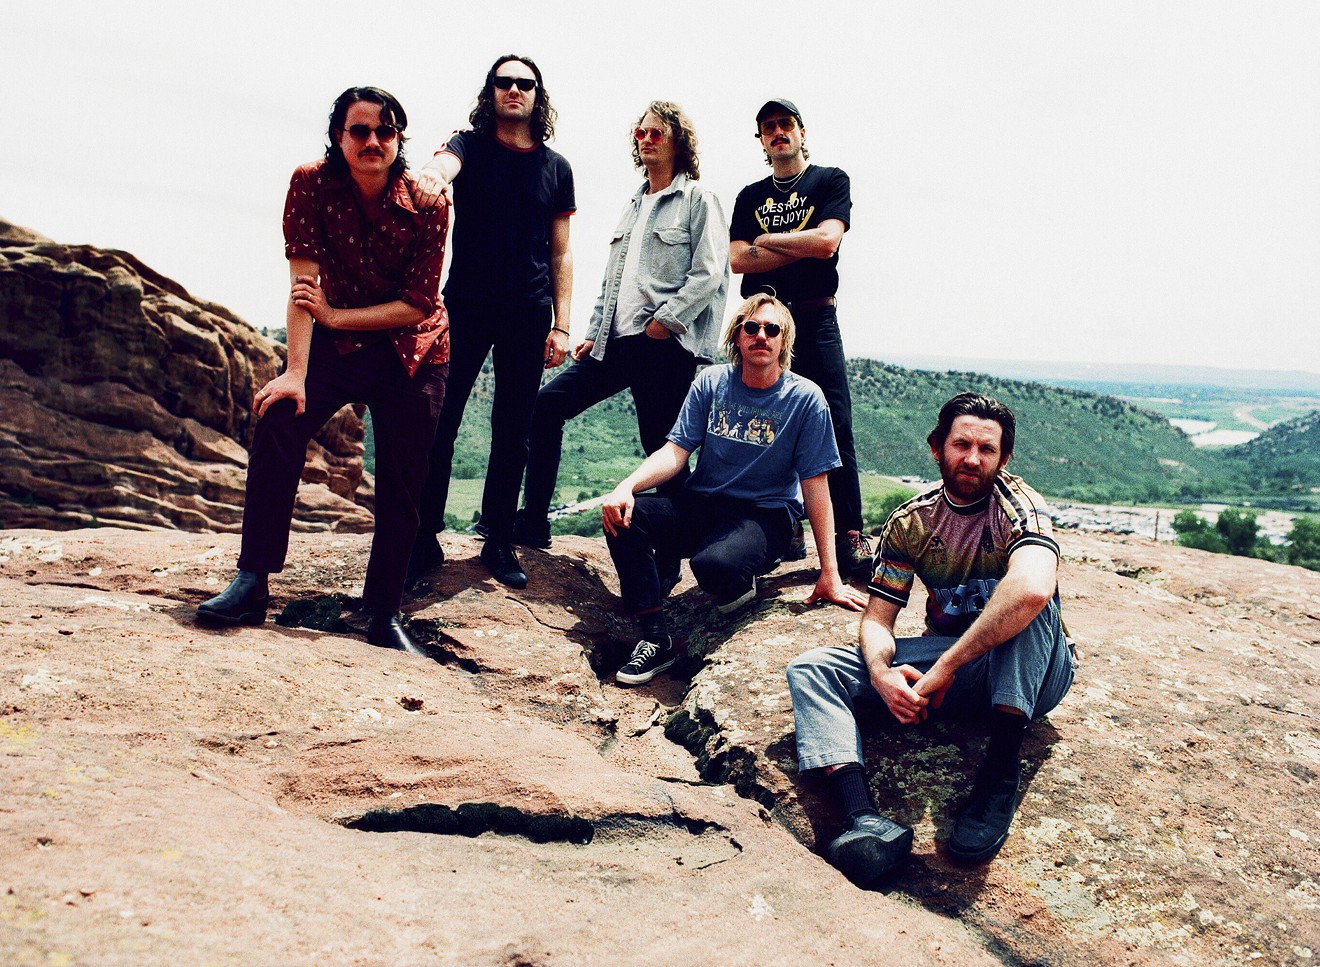 King Gizzard & the Lizard Wizard will play Red Rocks on September 7 and 8 next year.